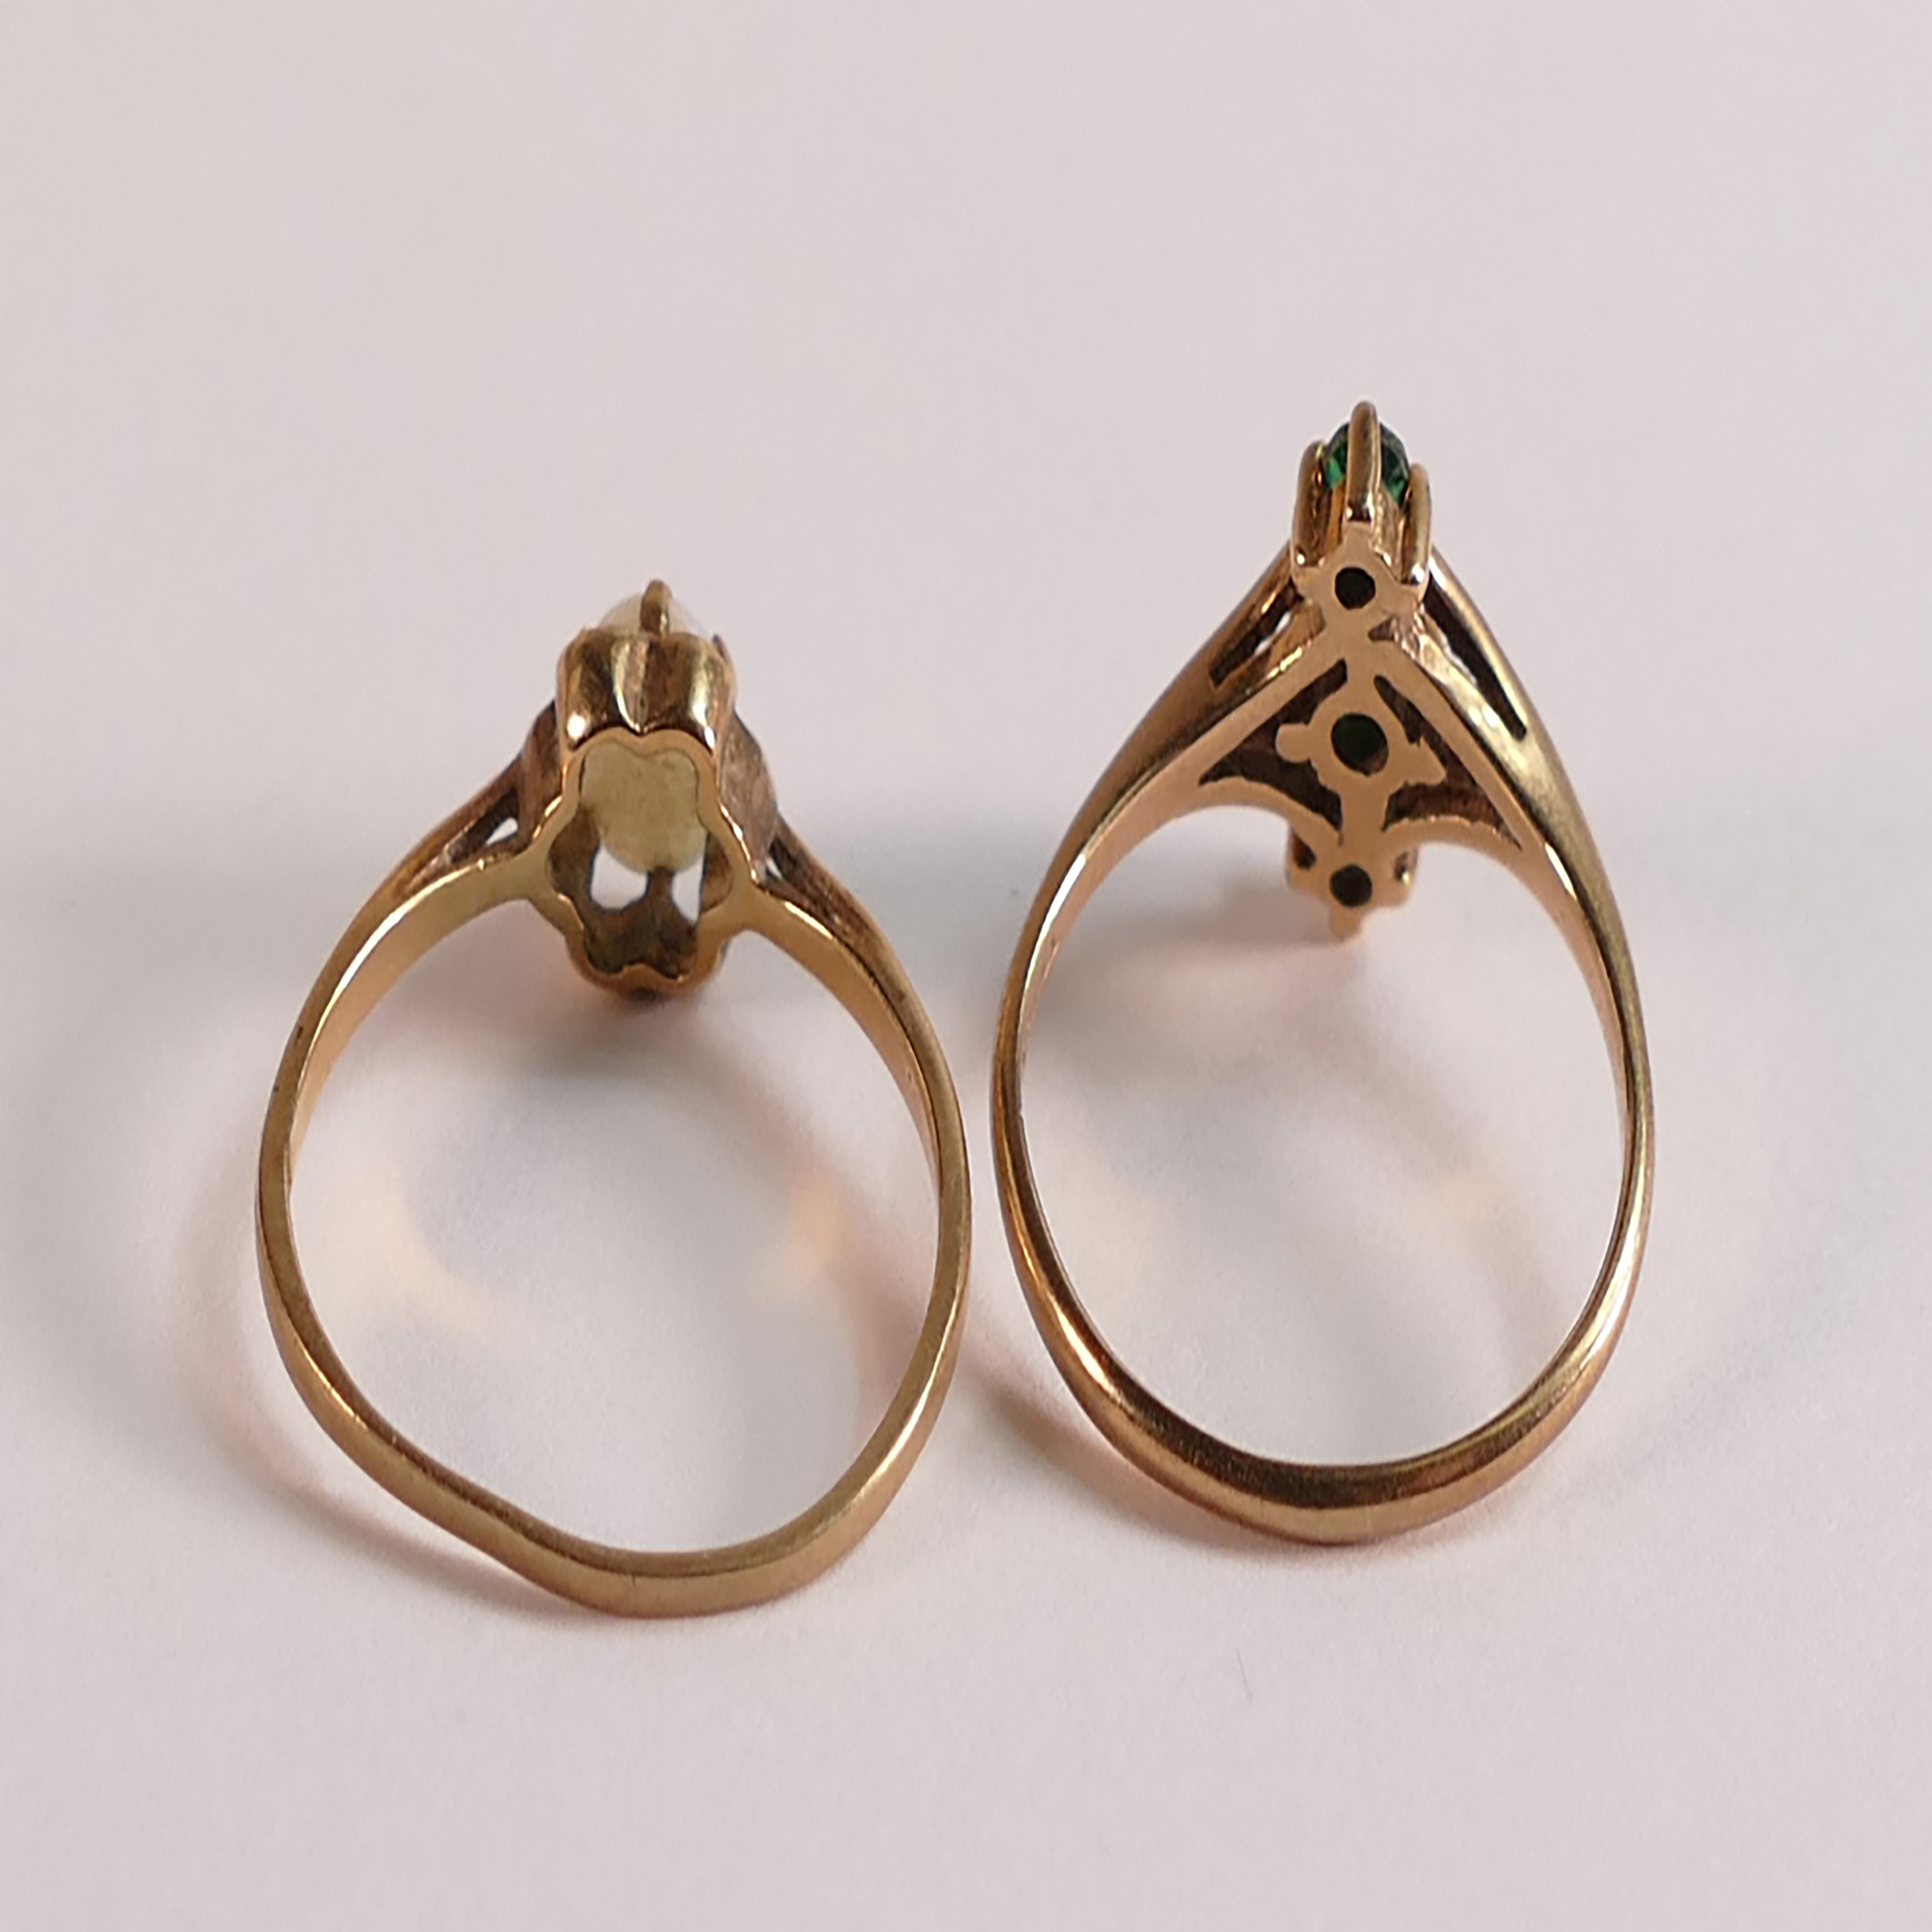 9ct gold ladies rings, one set with opal and the other with three green stones, 3.1g. (2) - Image 2 of 3